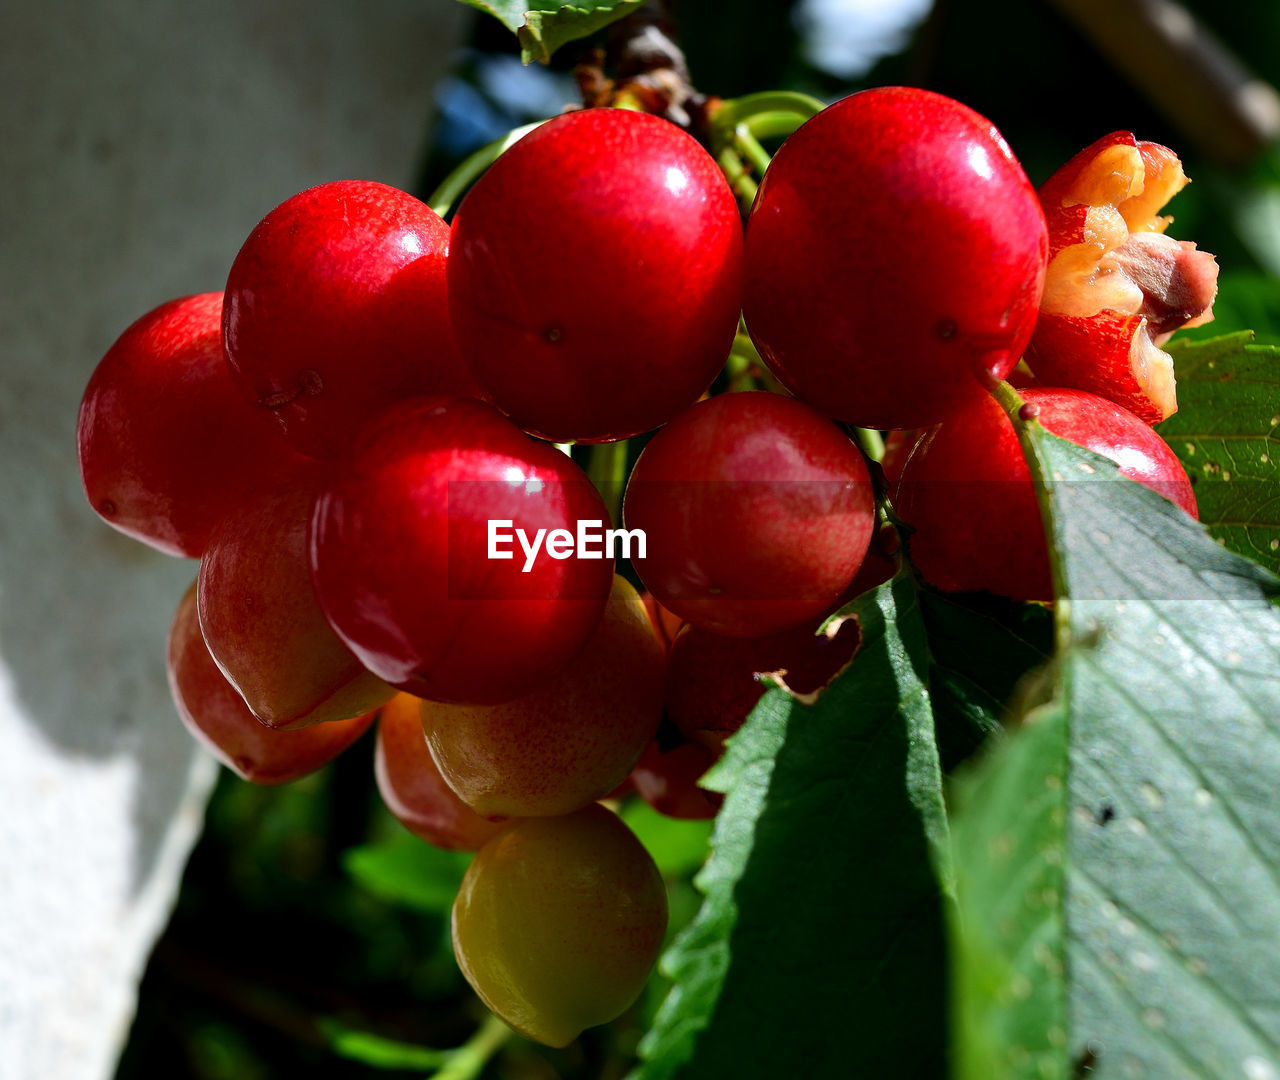 CLOSE-UP OF RED BERRIES IN WATER